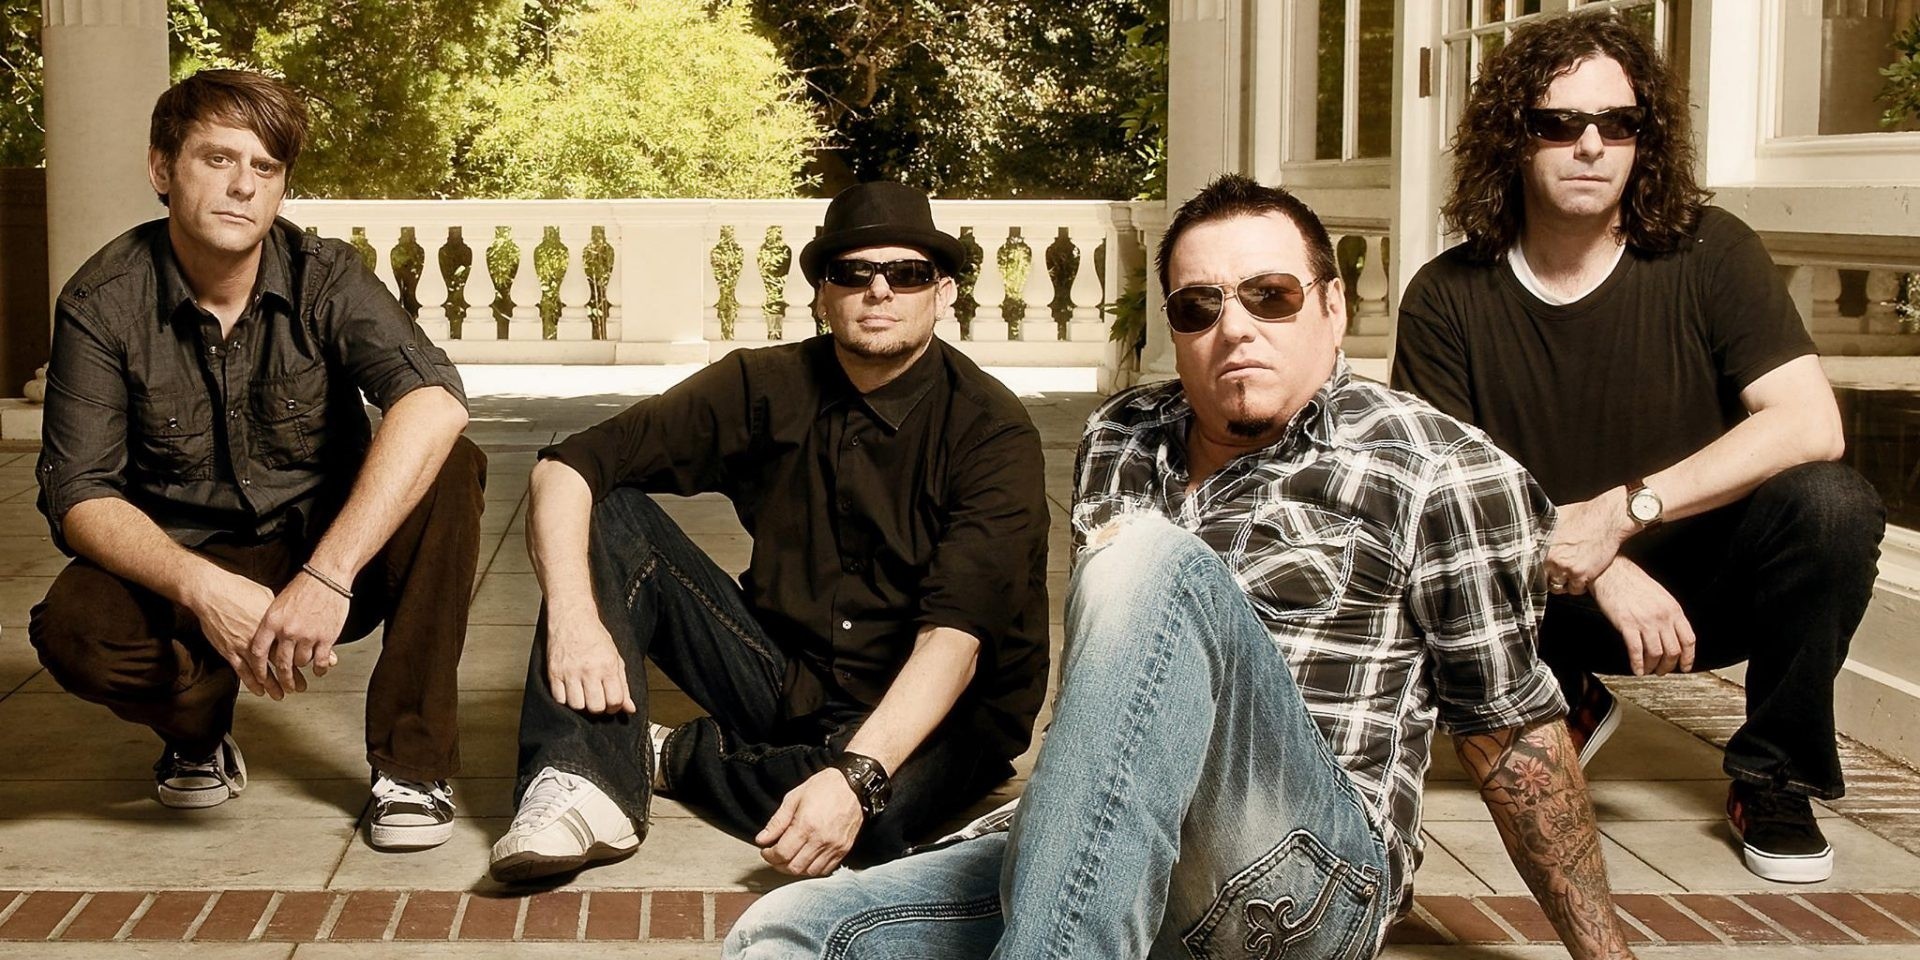 "We're all friends and we've just kept going": An interview with Smash Mouth's Paul De Lisle